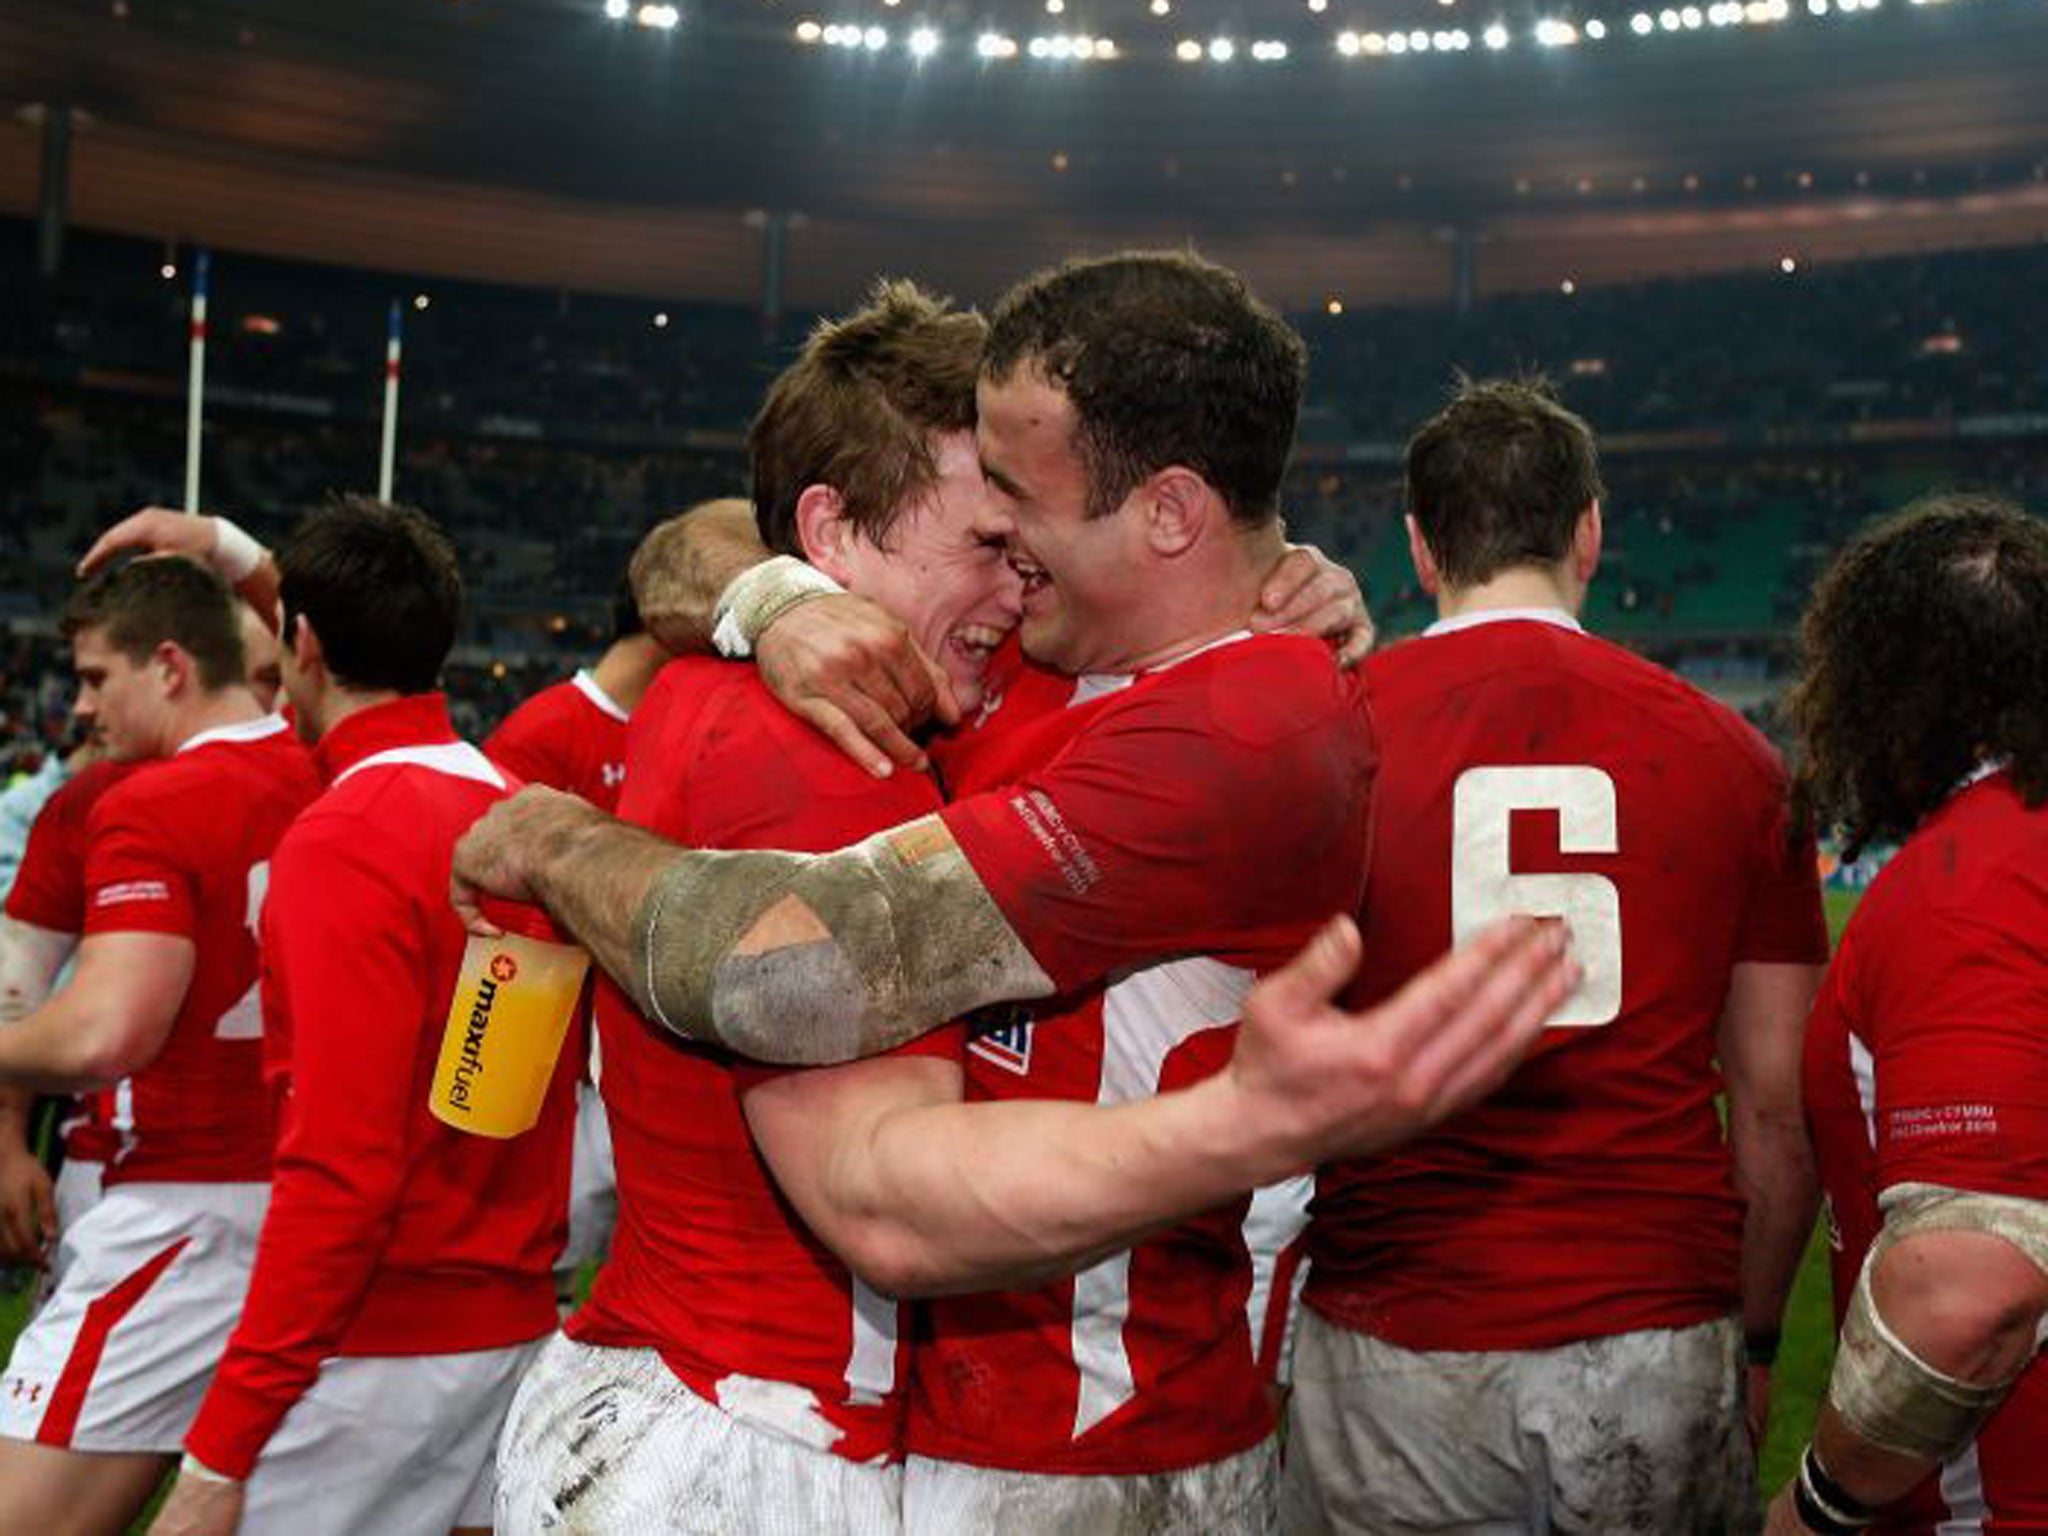 It was emotional after our win – as my bear hug on Jonathan Davies shows